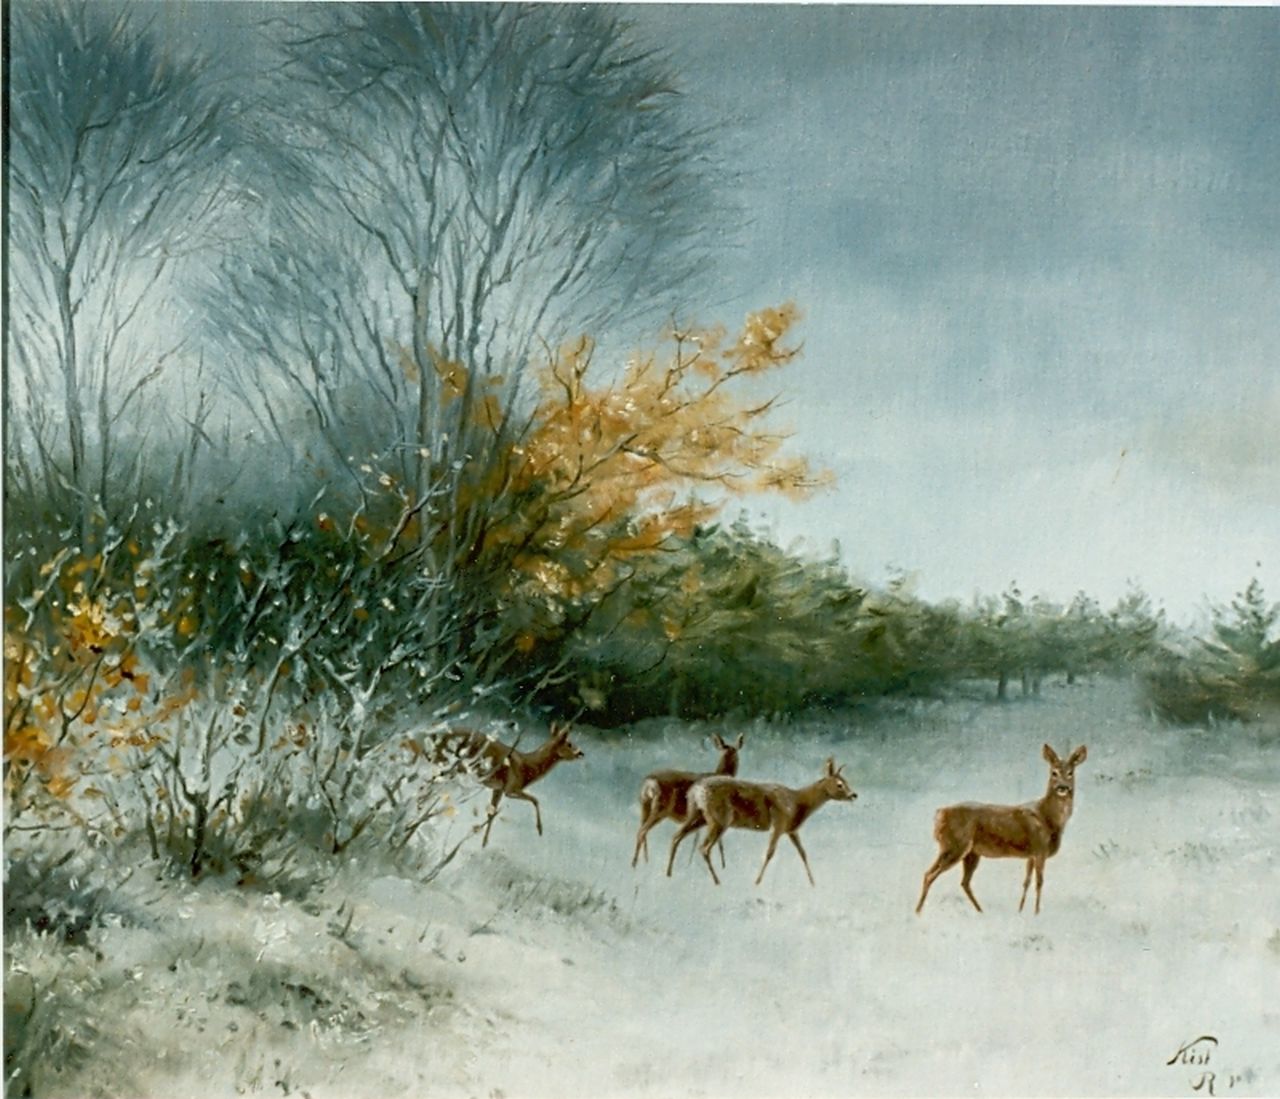 Kiss R.  | Richard Kiss, A winter landscape with deer, oil on canvas laid down on panel 50.0 x 80.0 cm, signed l.l. and dated '90